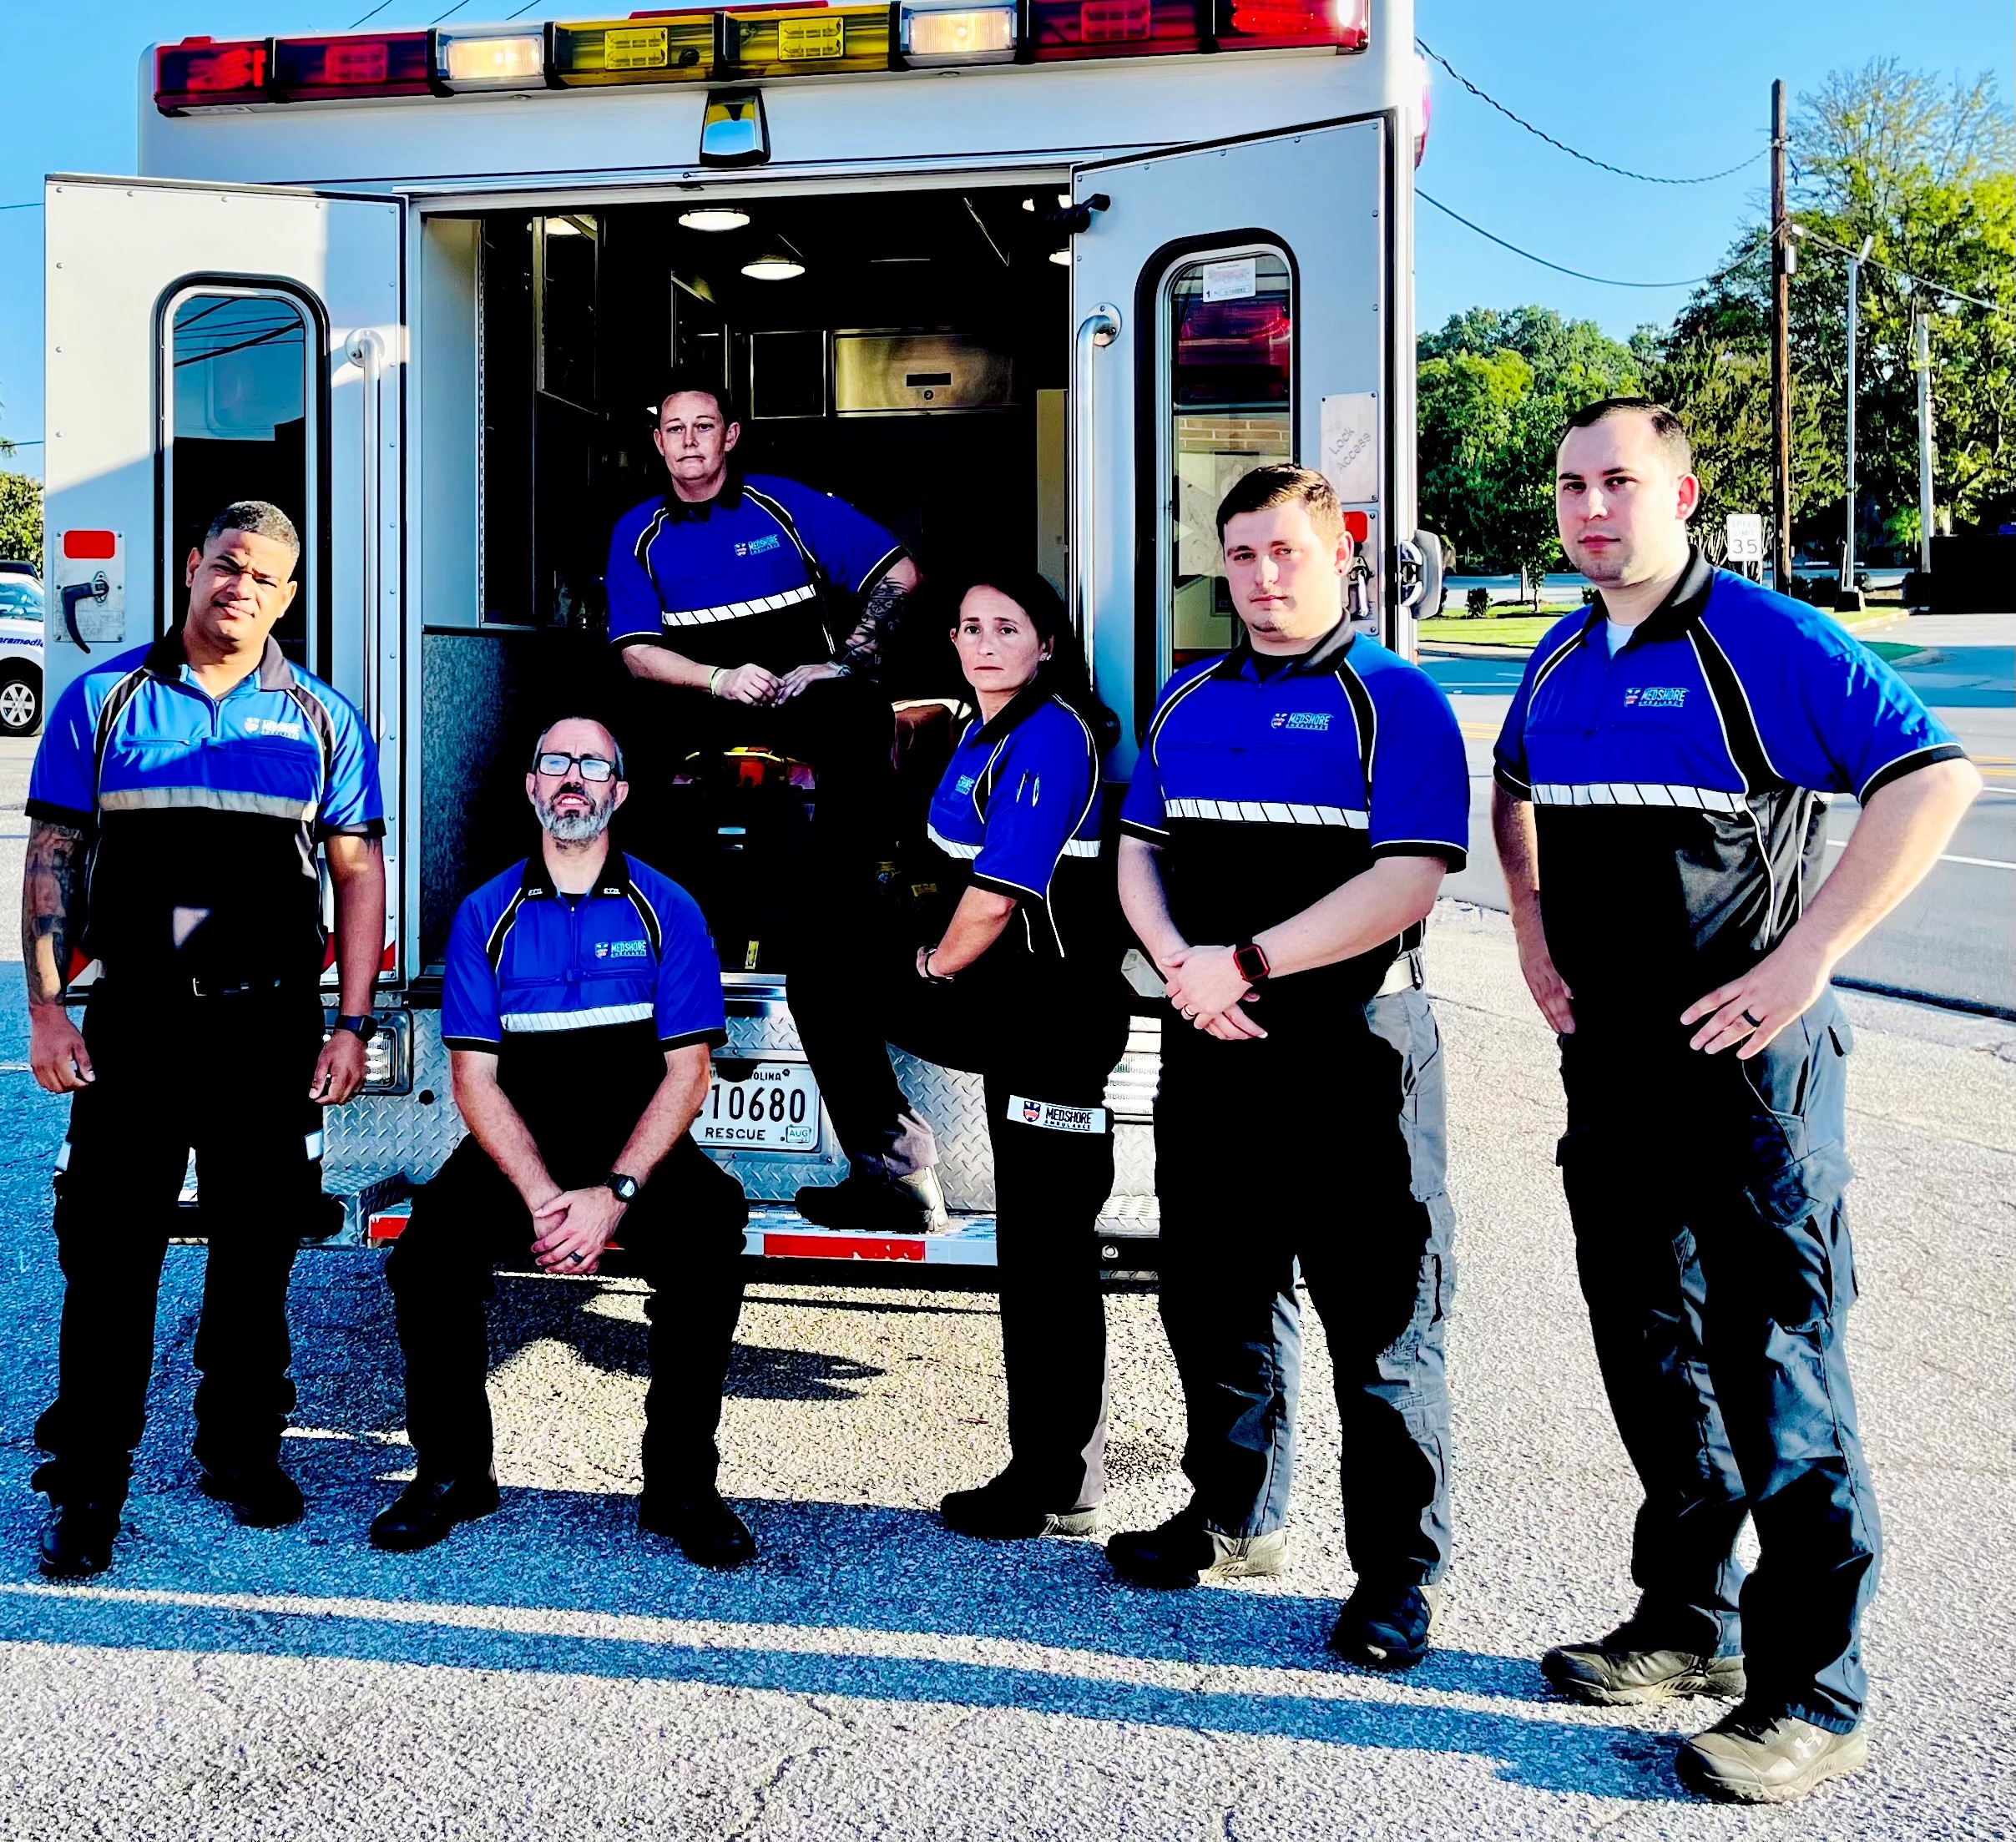 Featured image for “Medshore Celebrates 21 years as the Only Nationally Accredited Ambulance Company in the South Carolina￼”